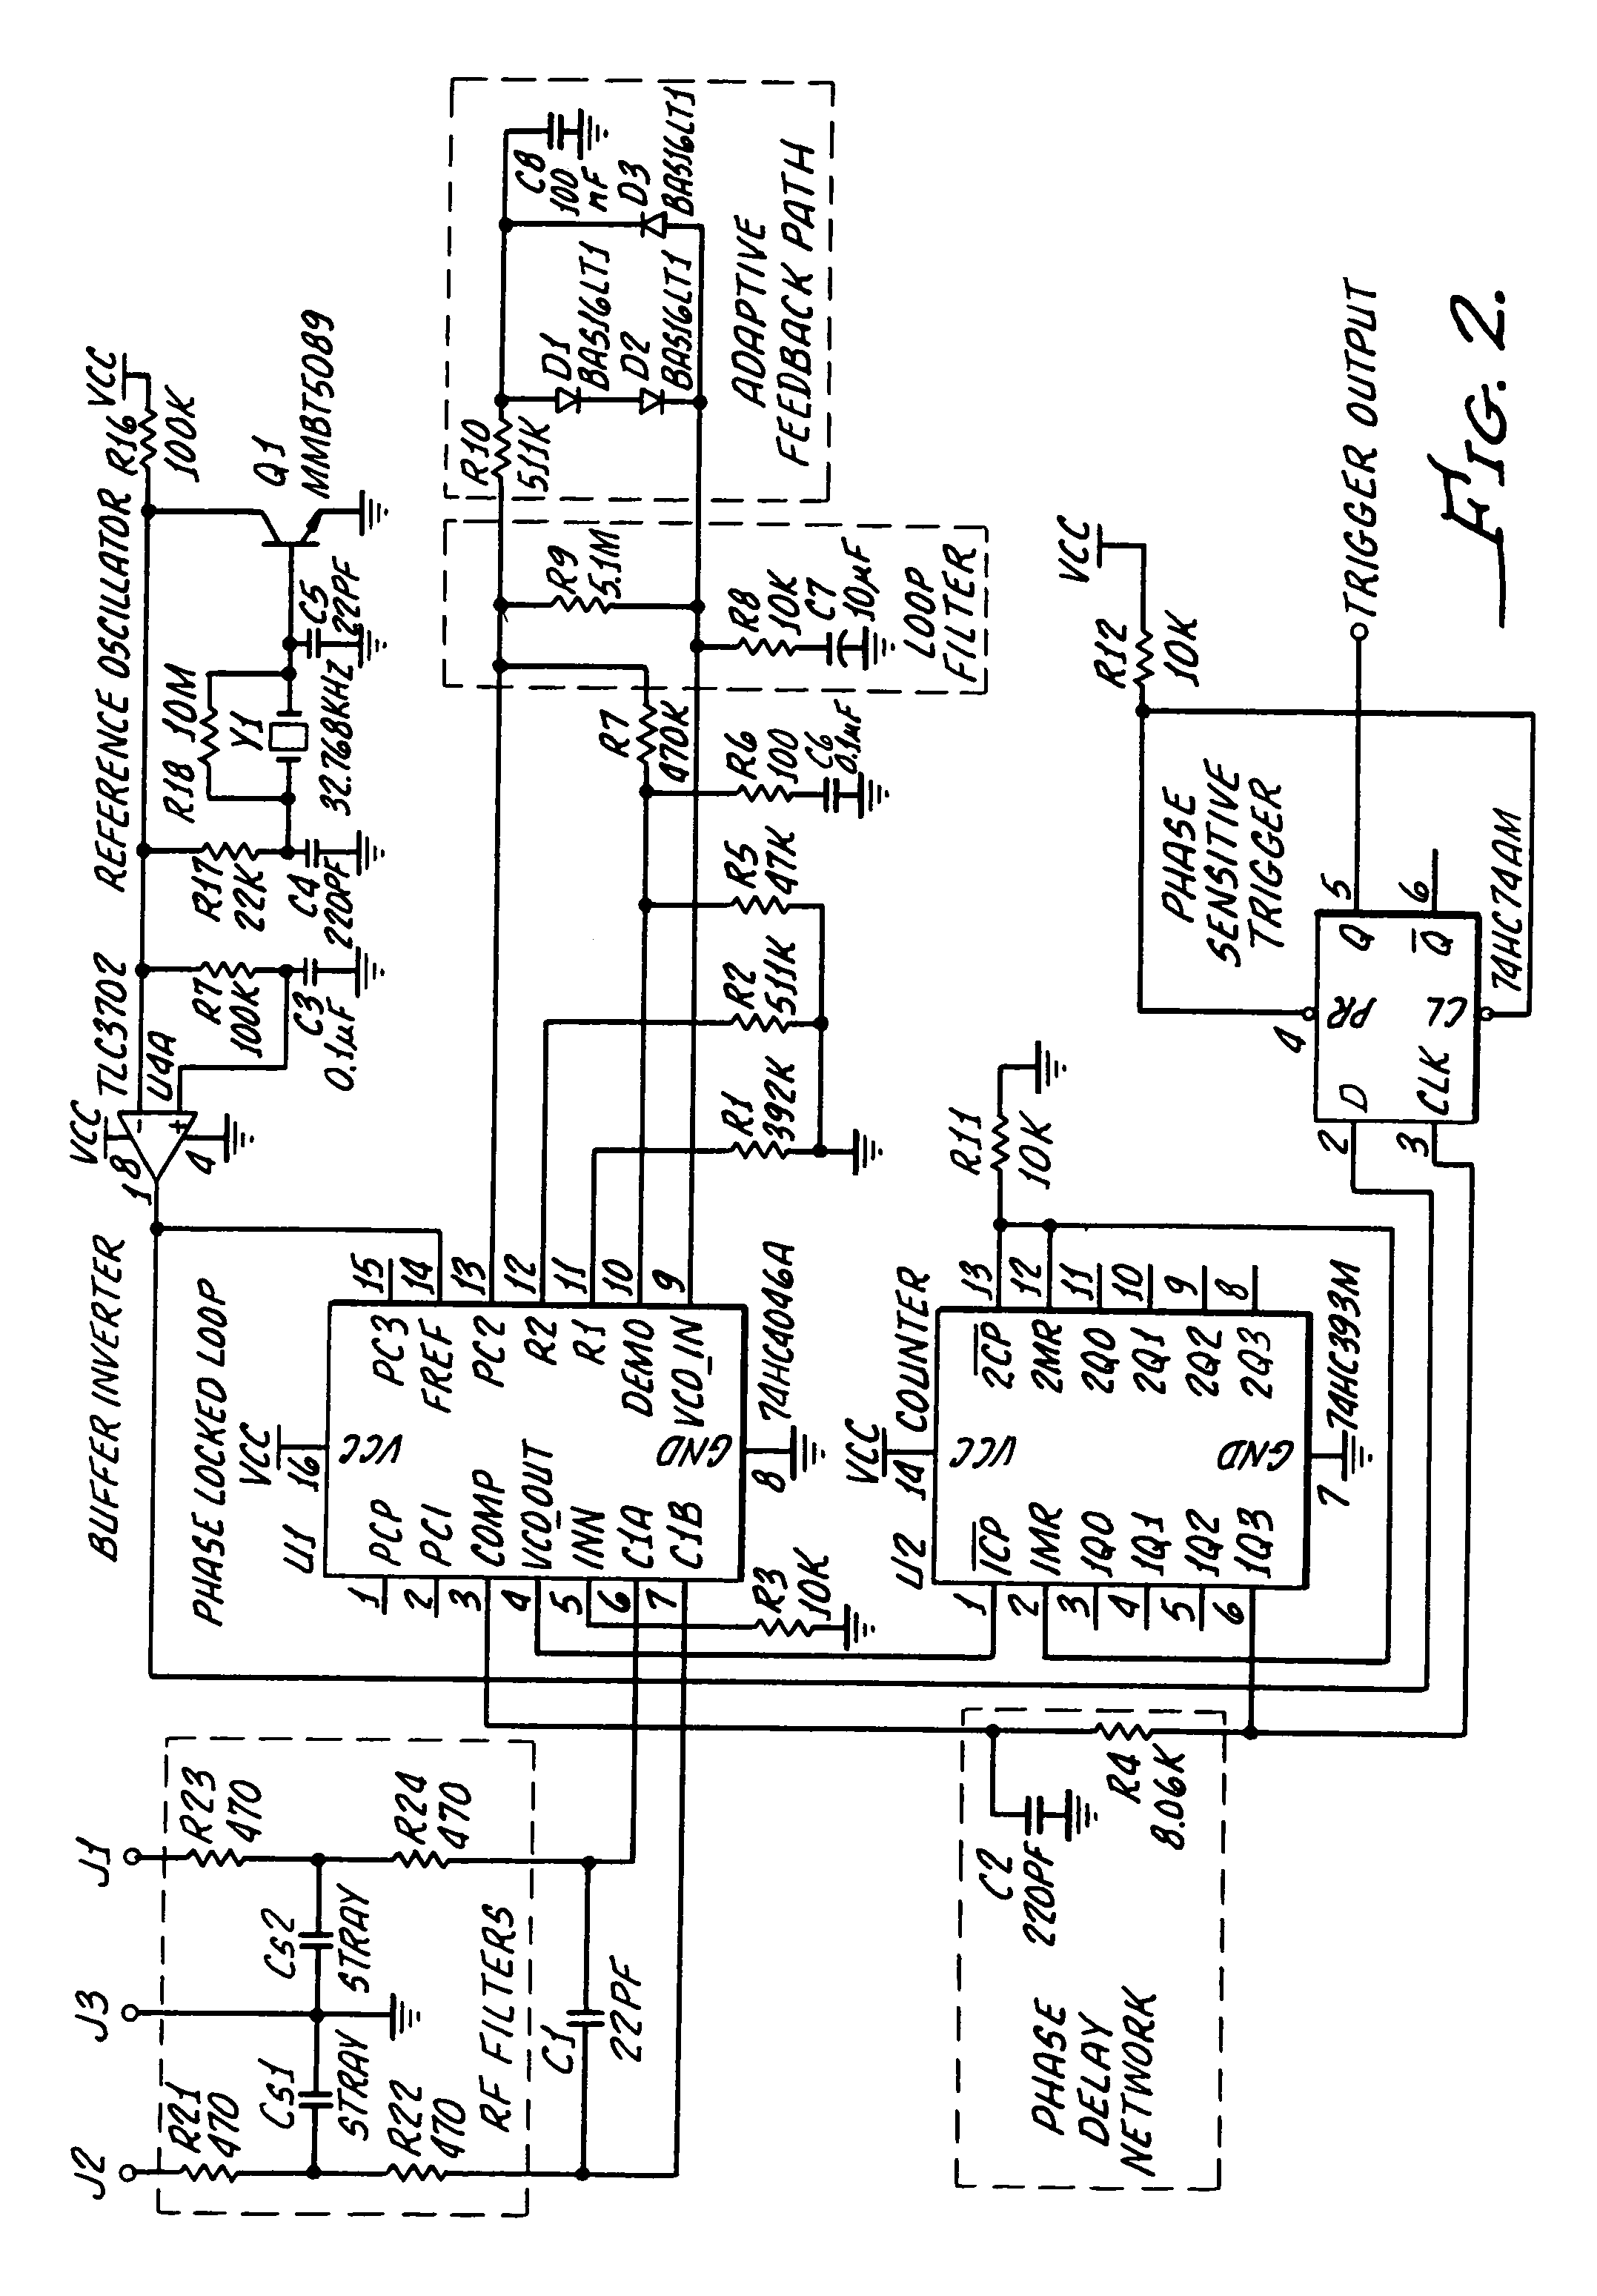 Control system with capacitive detector